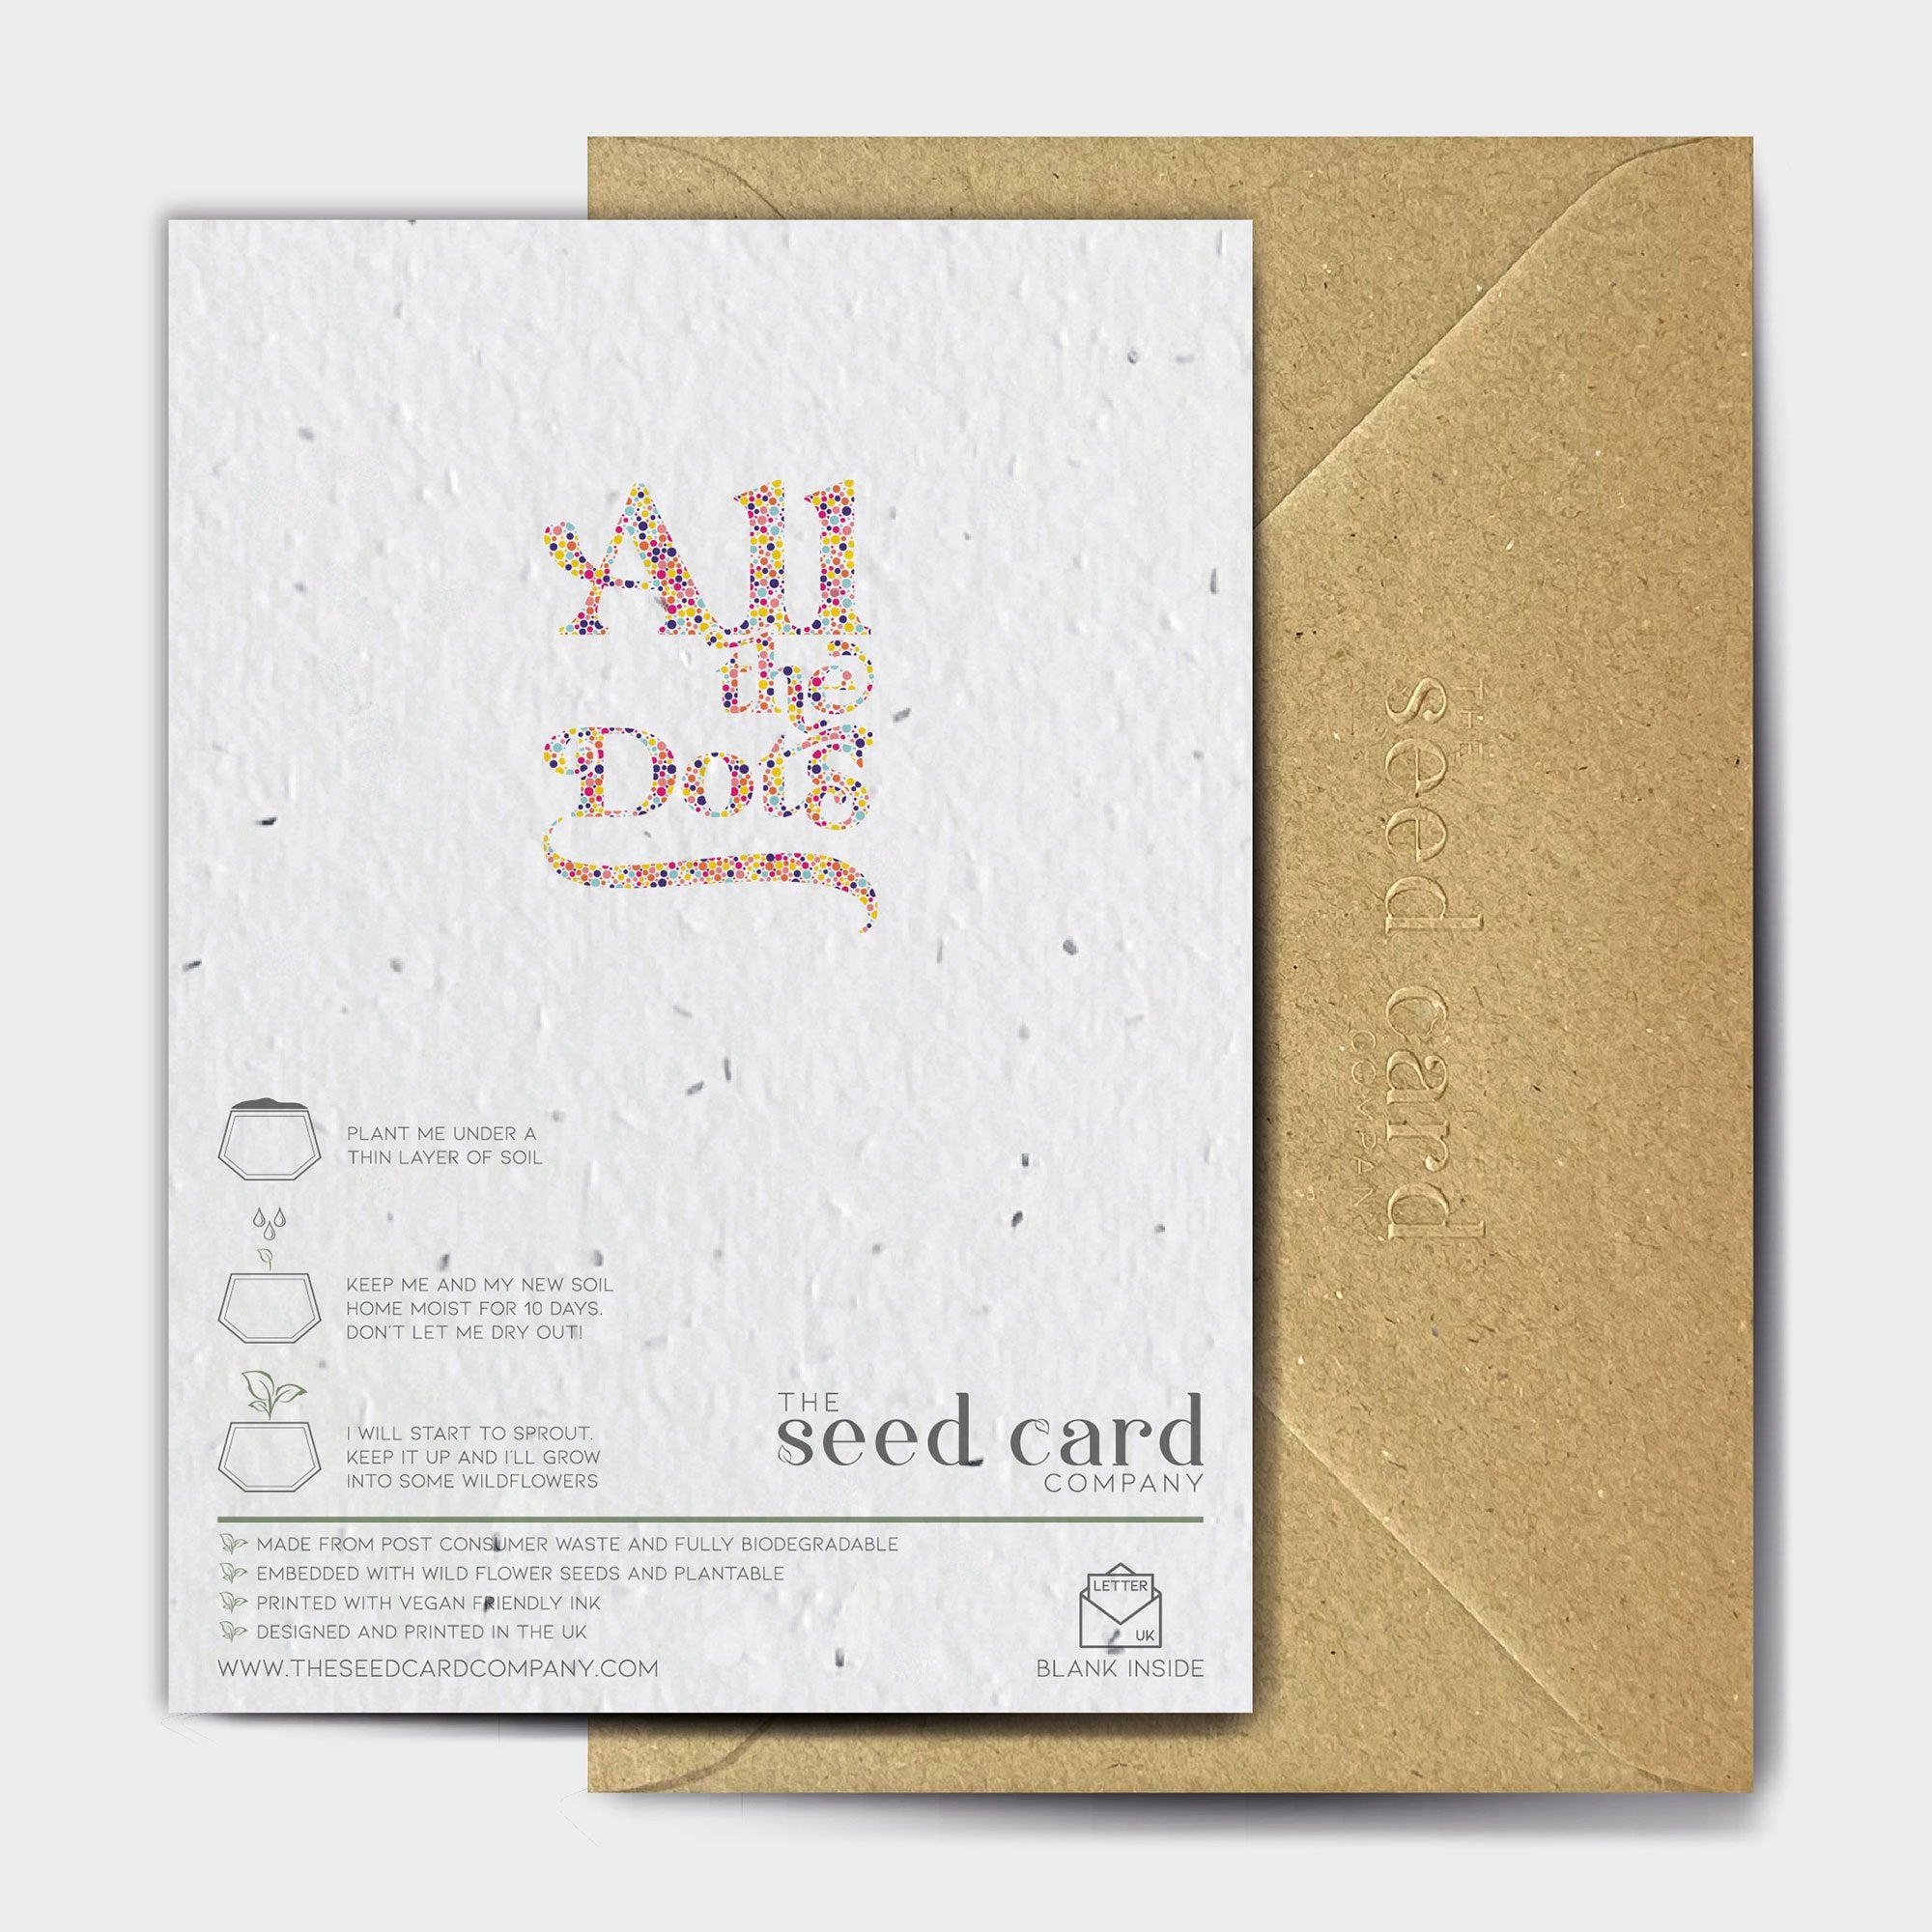 Shop online Birthdot Girl! - 100% biodegradable seed-embedded cards Shop -The Seed Card Company